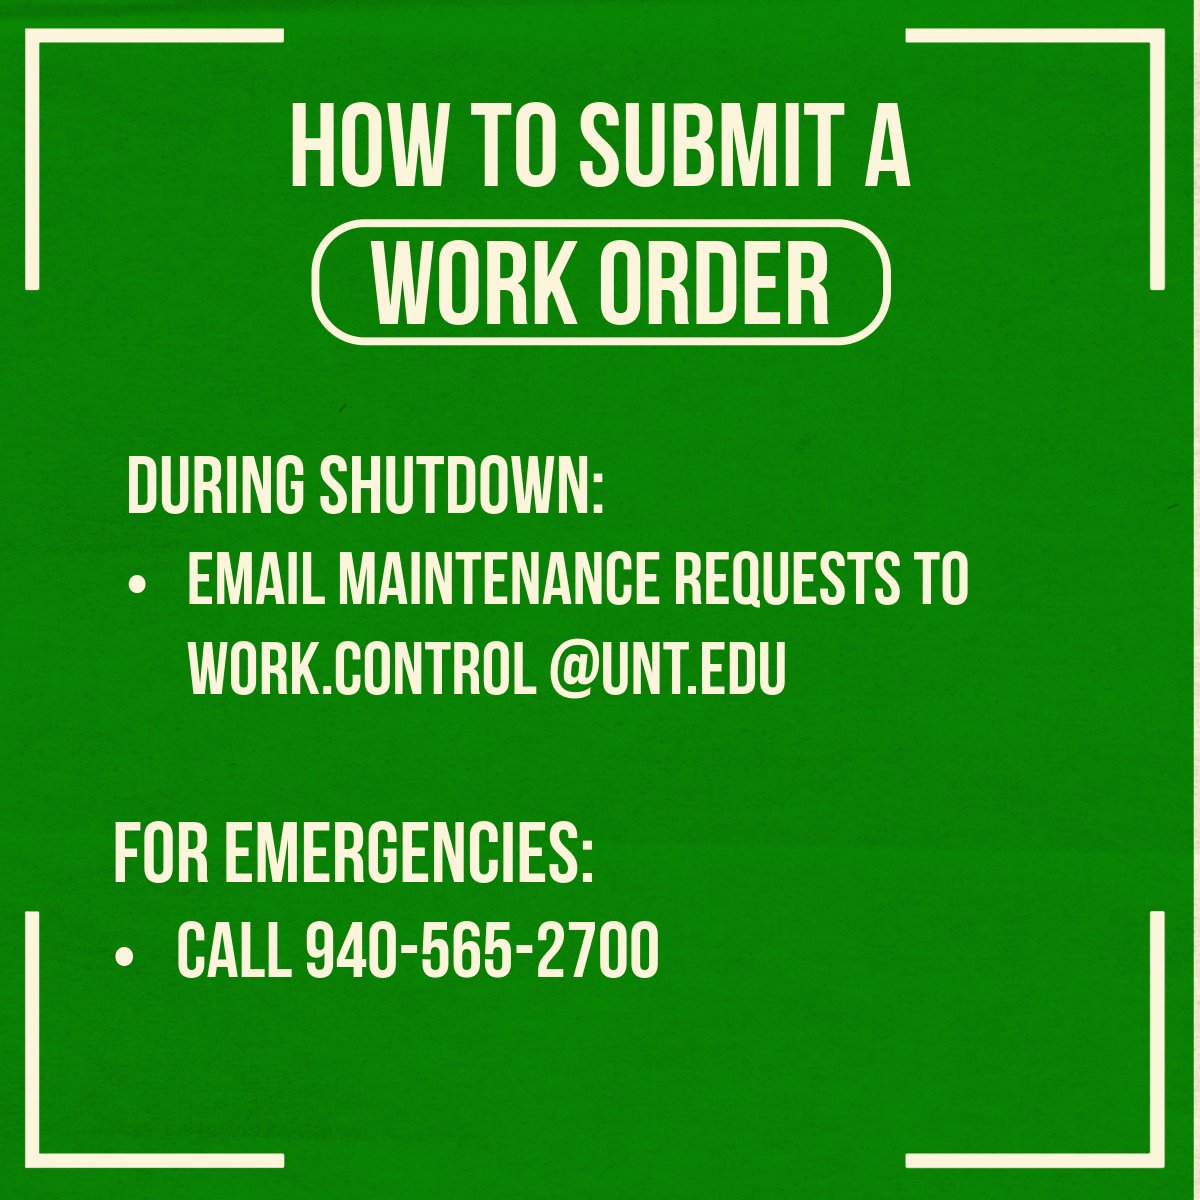 Heads up, UNT! Our work order system will be offline on Friday, Sept 15th at 2:30pm to Monday, the 18th to complete necessary updates to our system. During the shutdown, email maintenance requests to our team at Work.Control@unt.edu. For emergencies, call us at 940-565-2700.